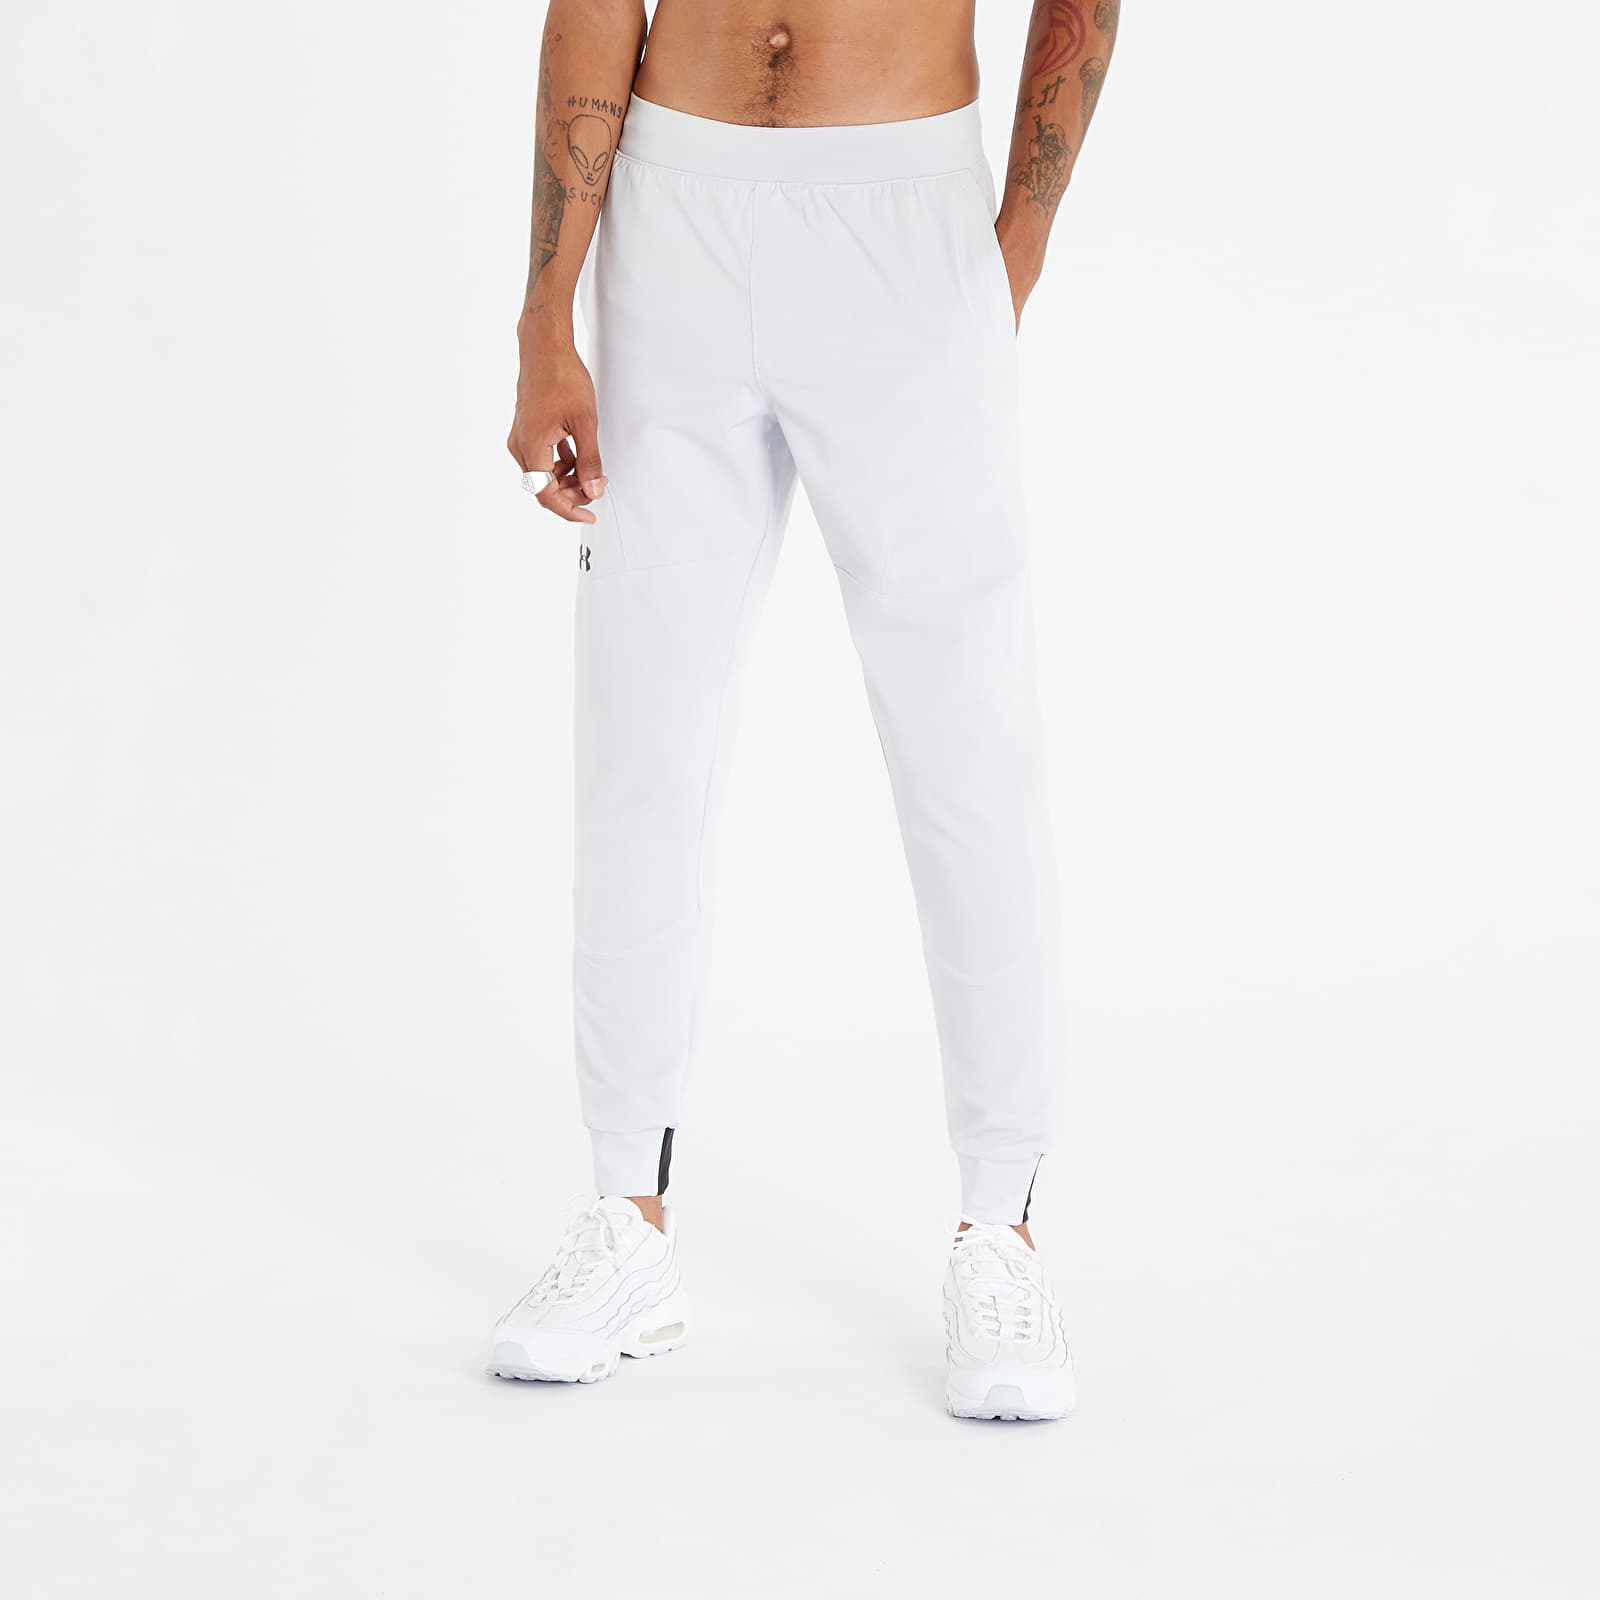 Under Armour - unstoppable joggers grey